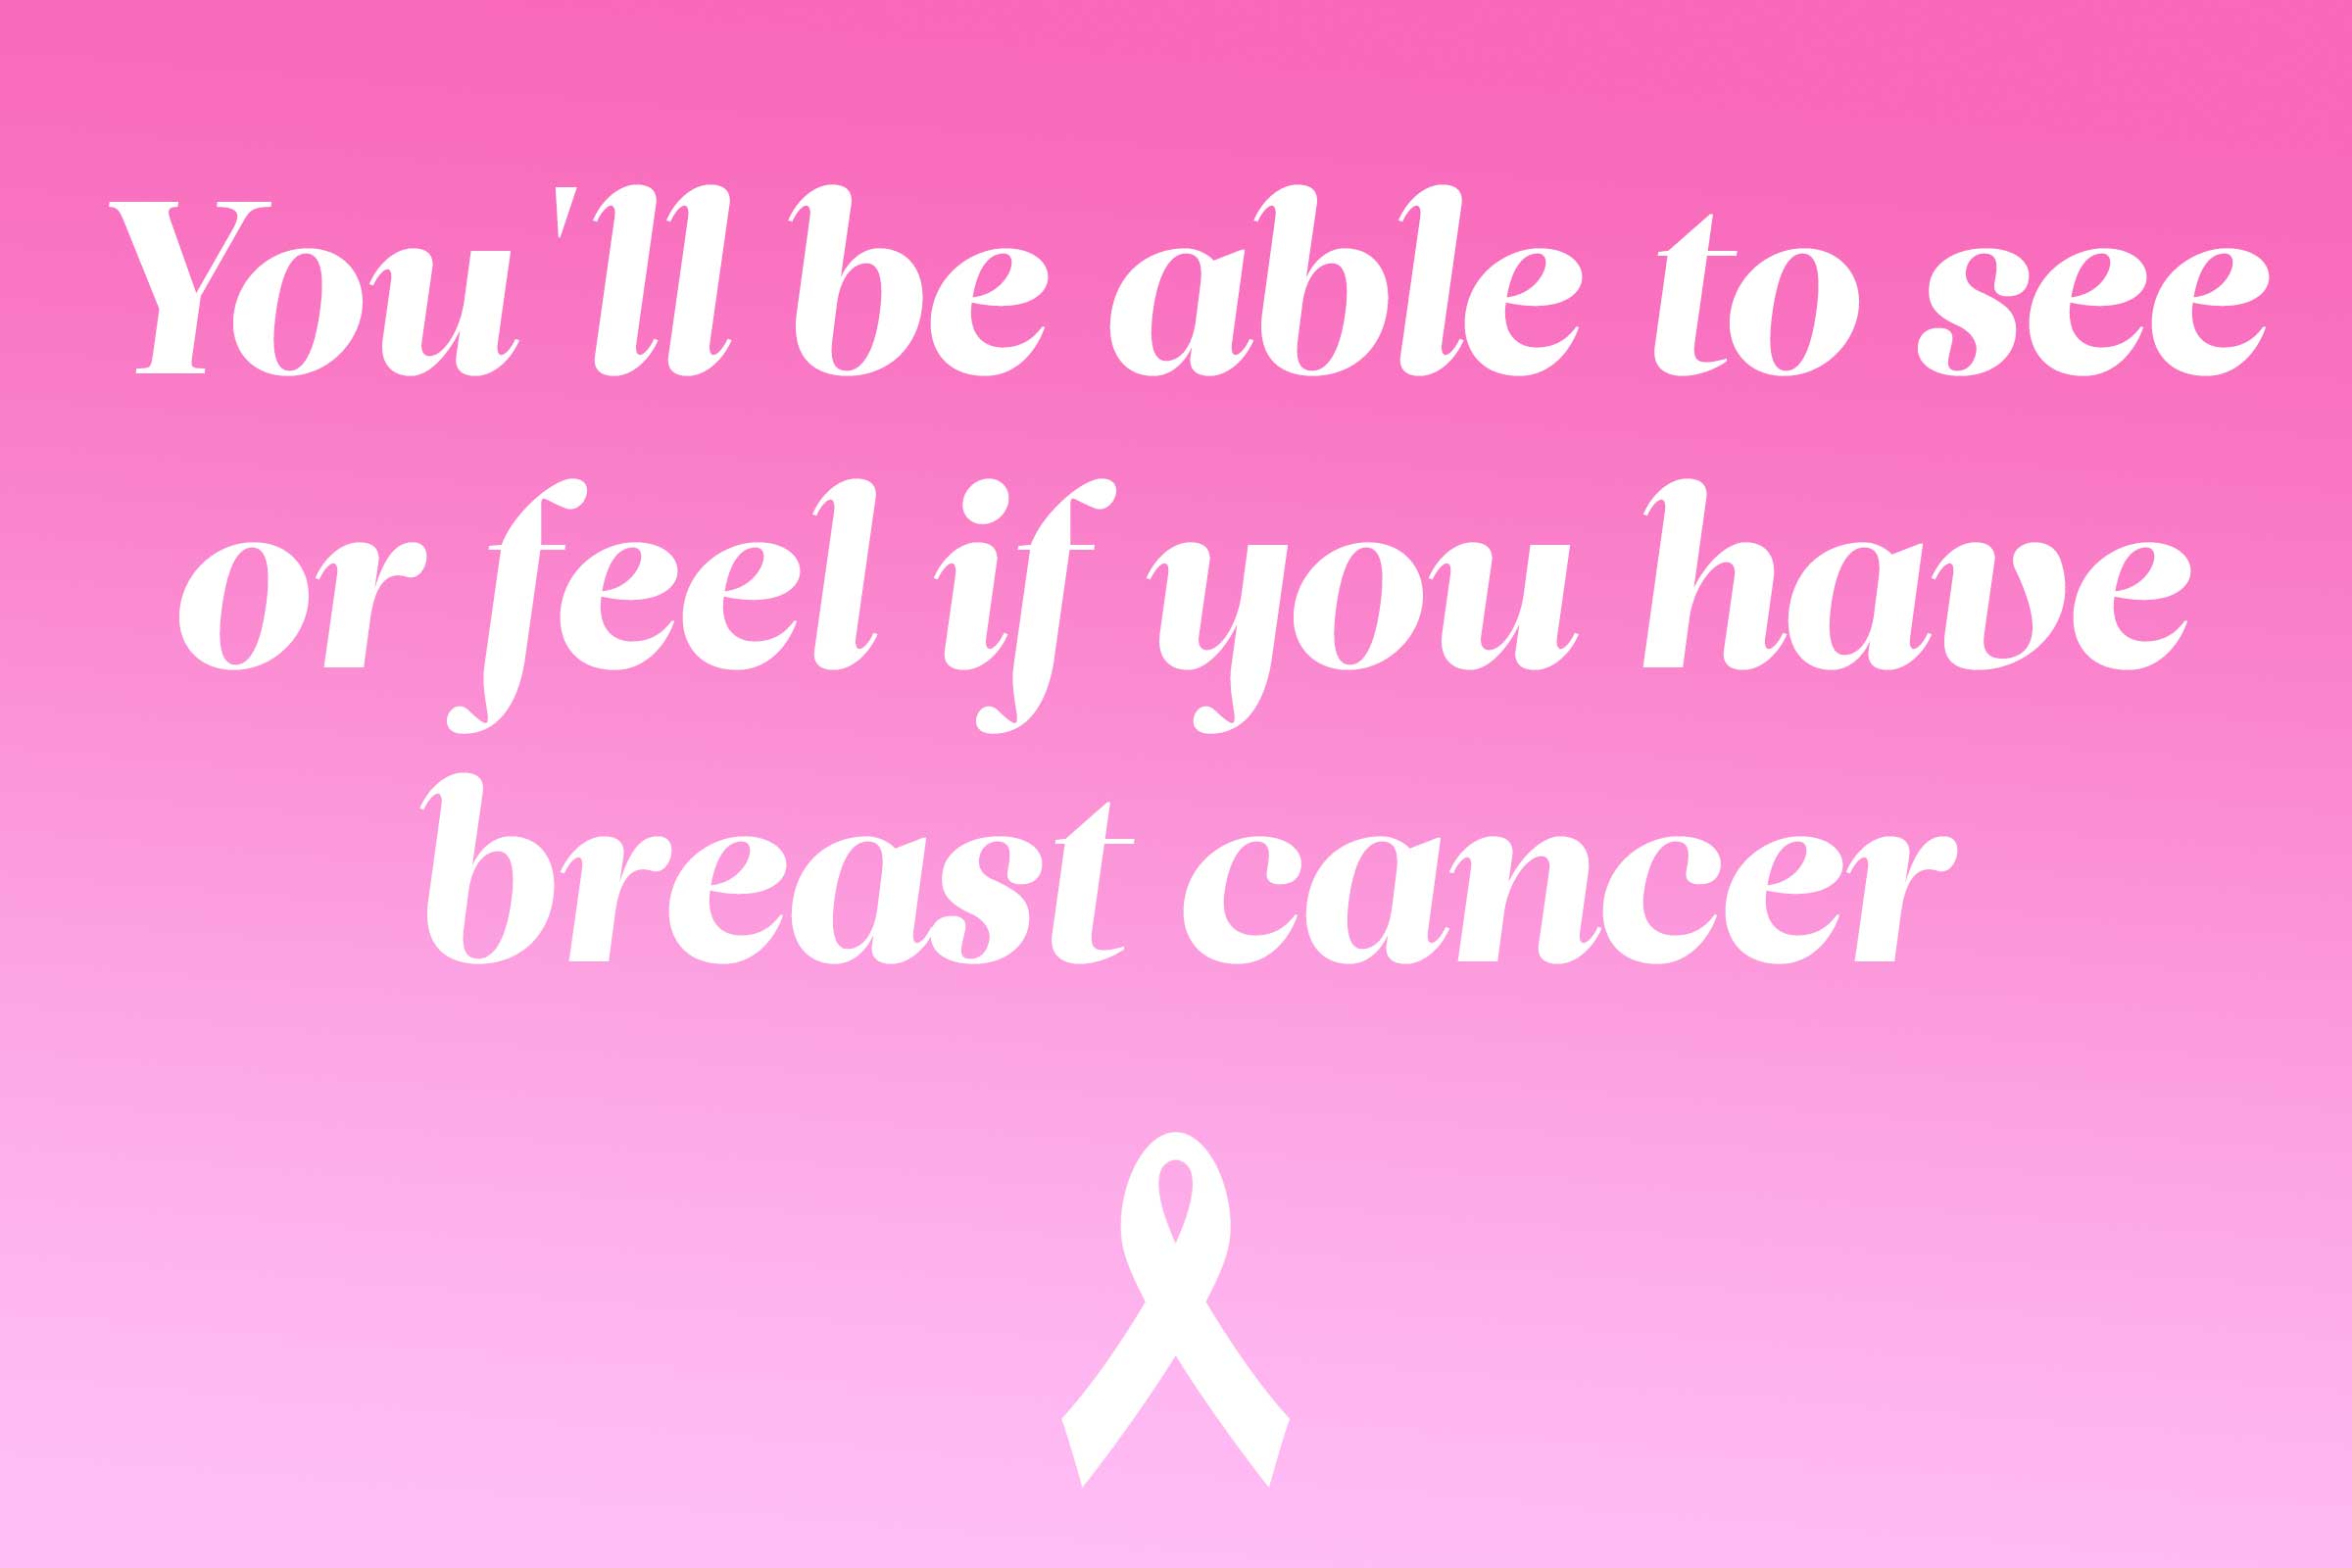 myth: you can see or feel if you have breast cancer